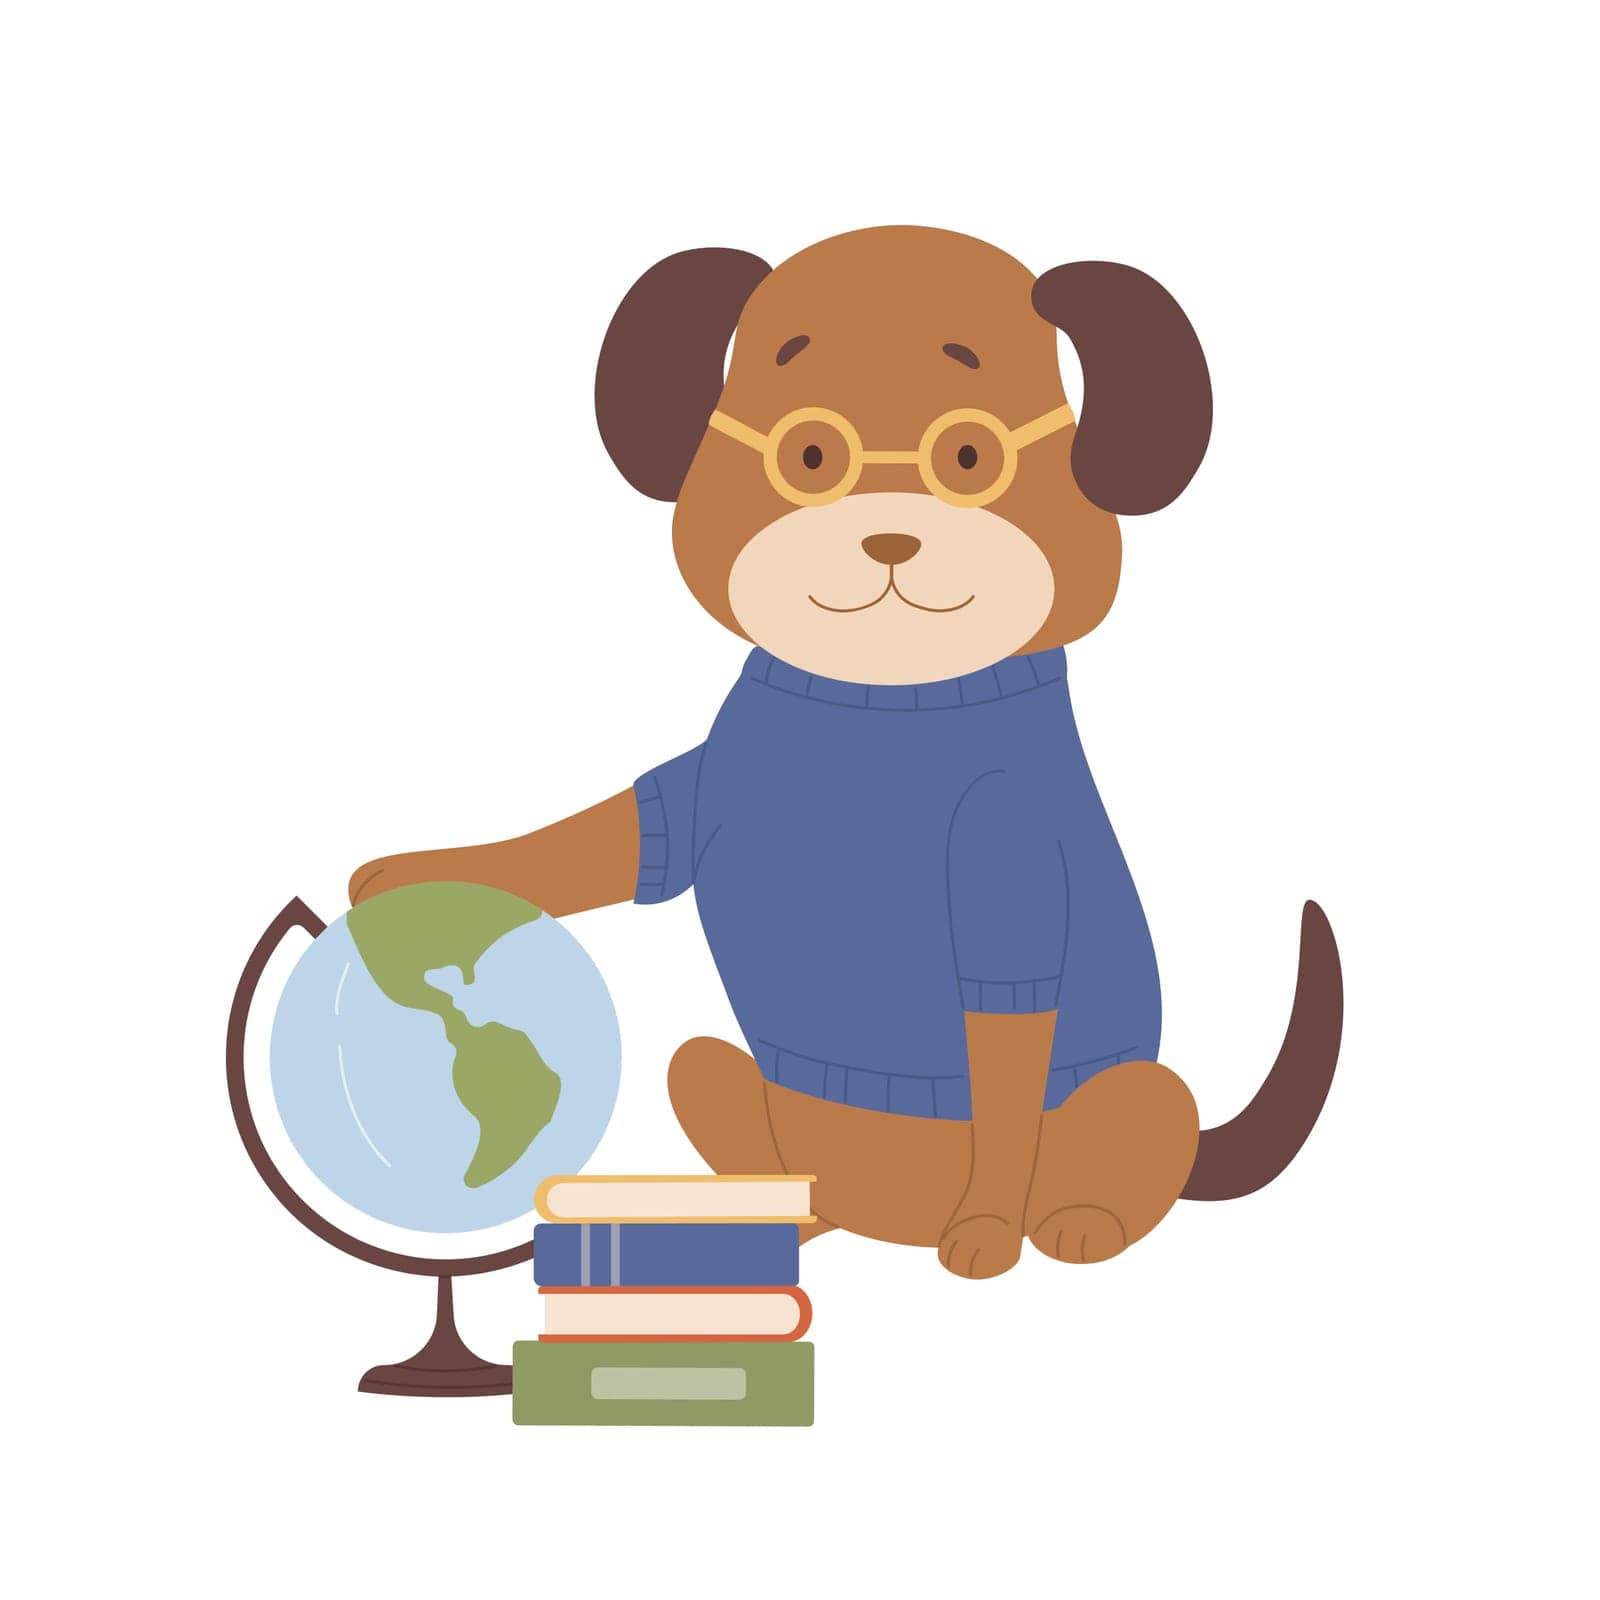 Cute dog with glasses with geography globe by Popov